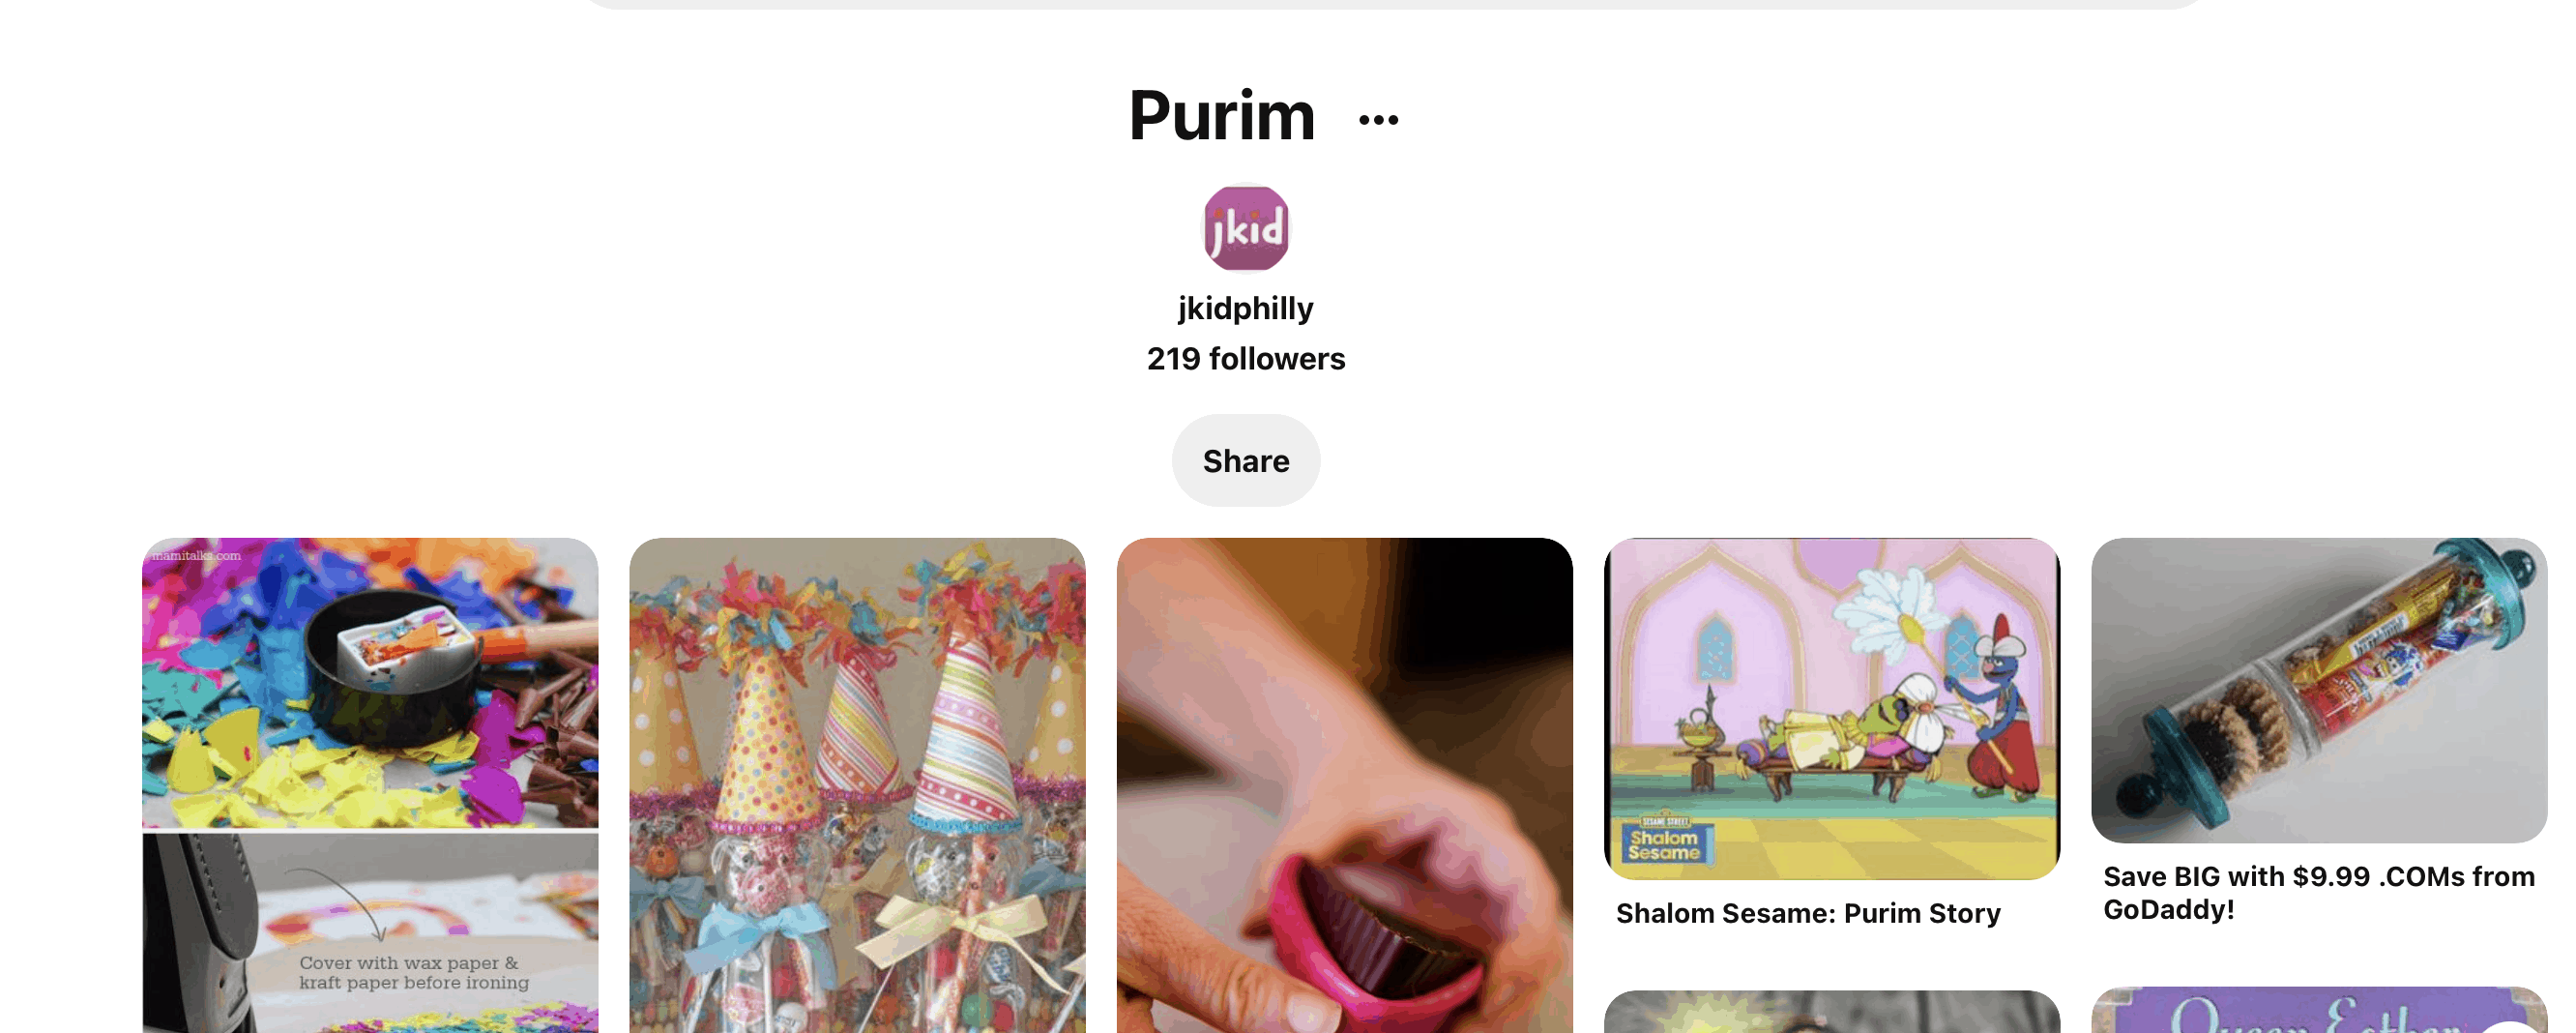 A Purim pinterest board with celebratory items such as party hats as well as desserts such as chocolate.